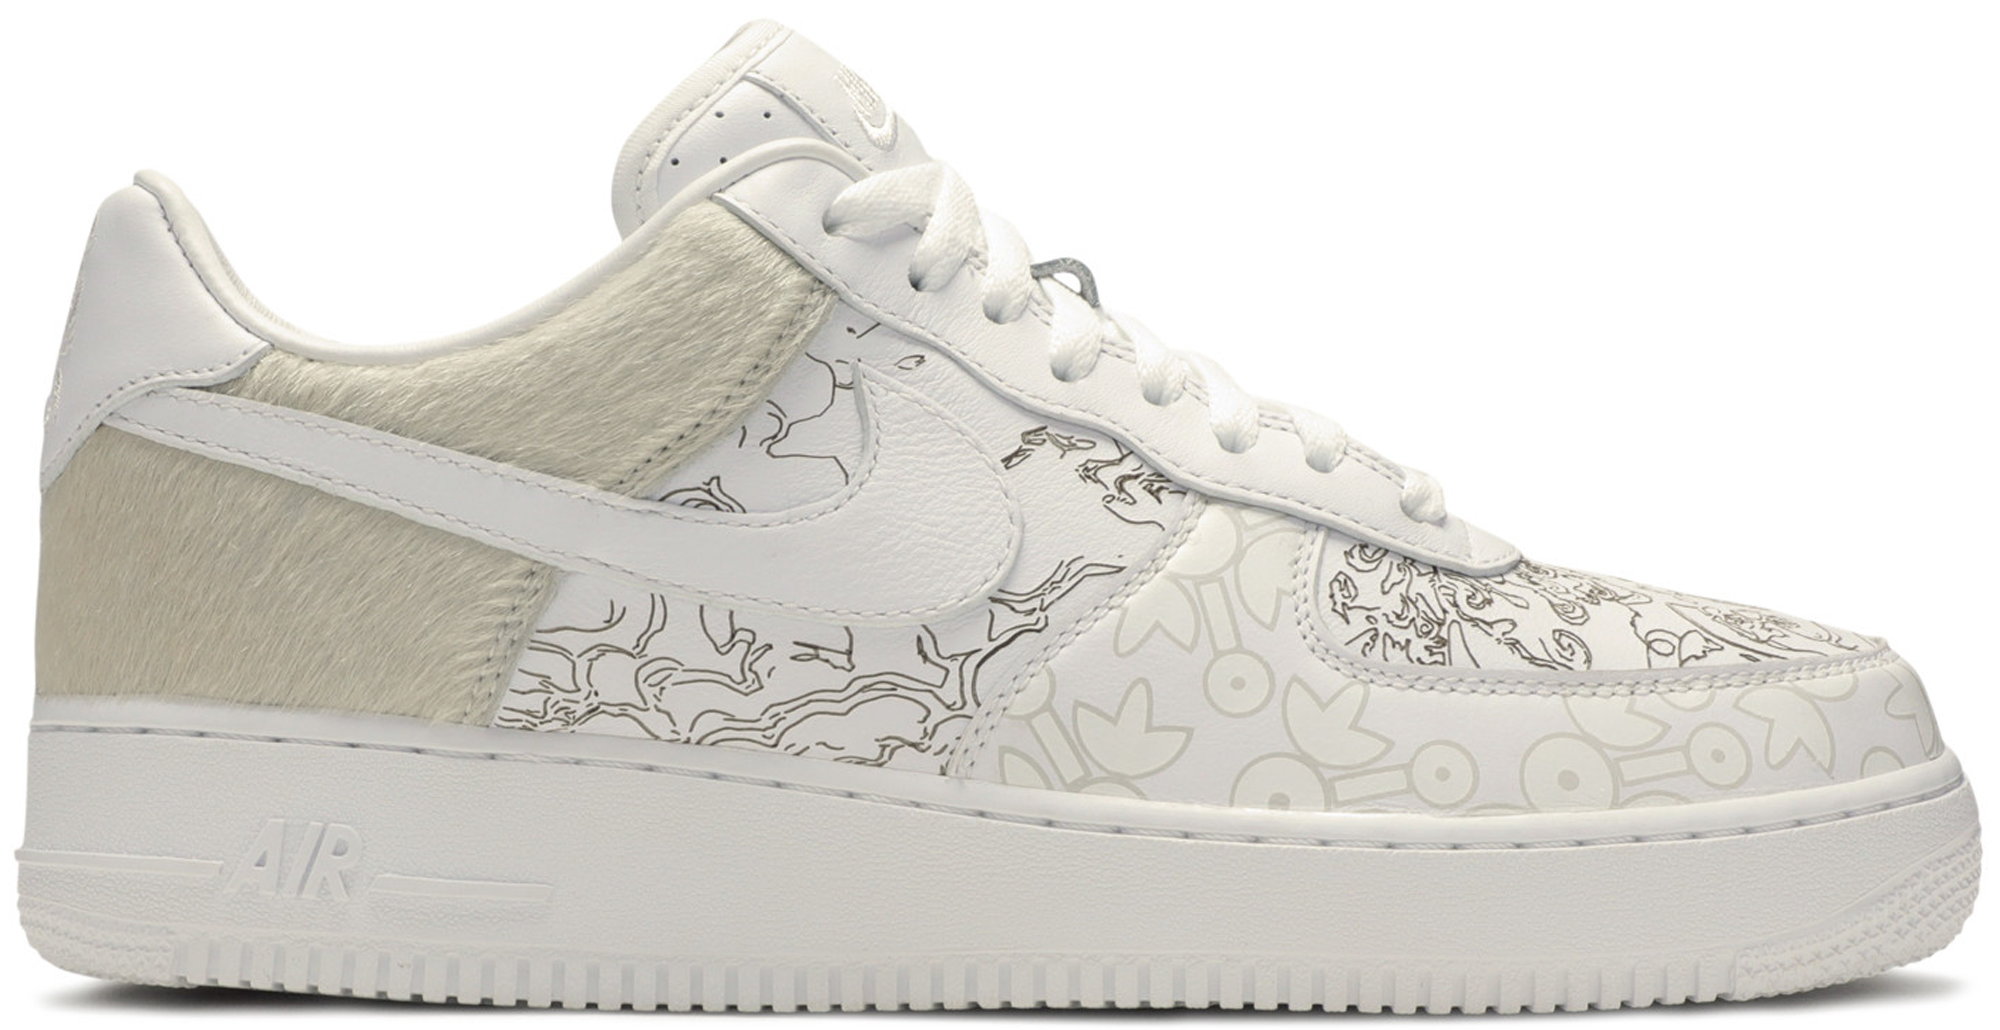 Nike Air Force 1 Low Year of the Dog 